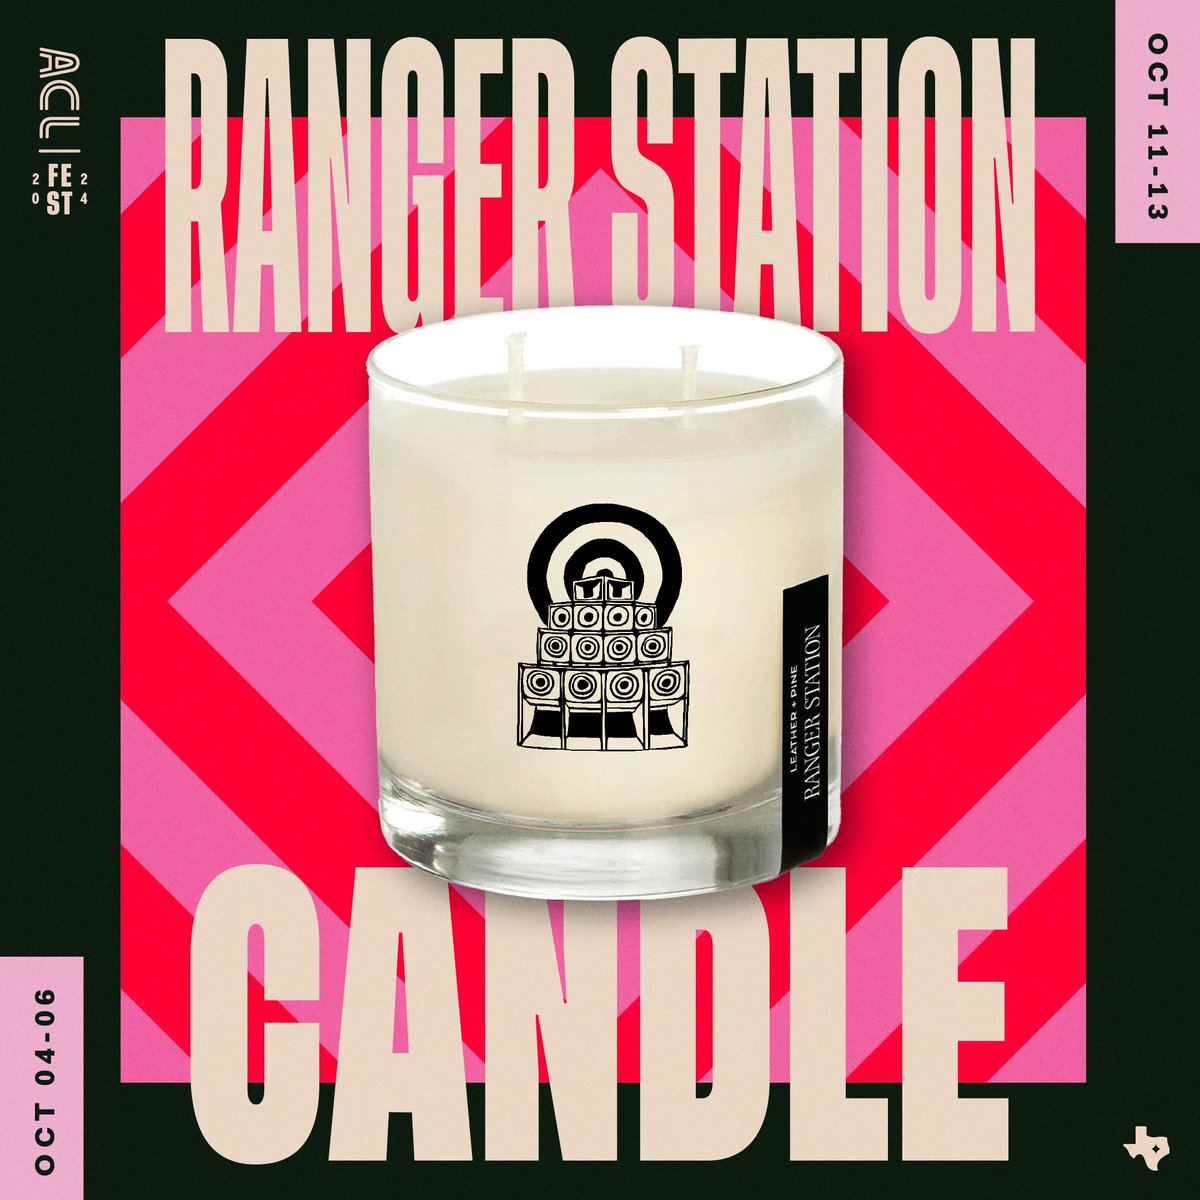 Add your 2024 poster and a Leather + Pine ACL Fest Edition Ranger Station candle to your order when tickets go on sale today at 12pm CT! aclfest.com